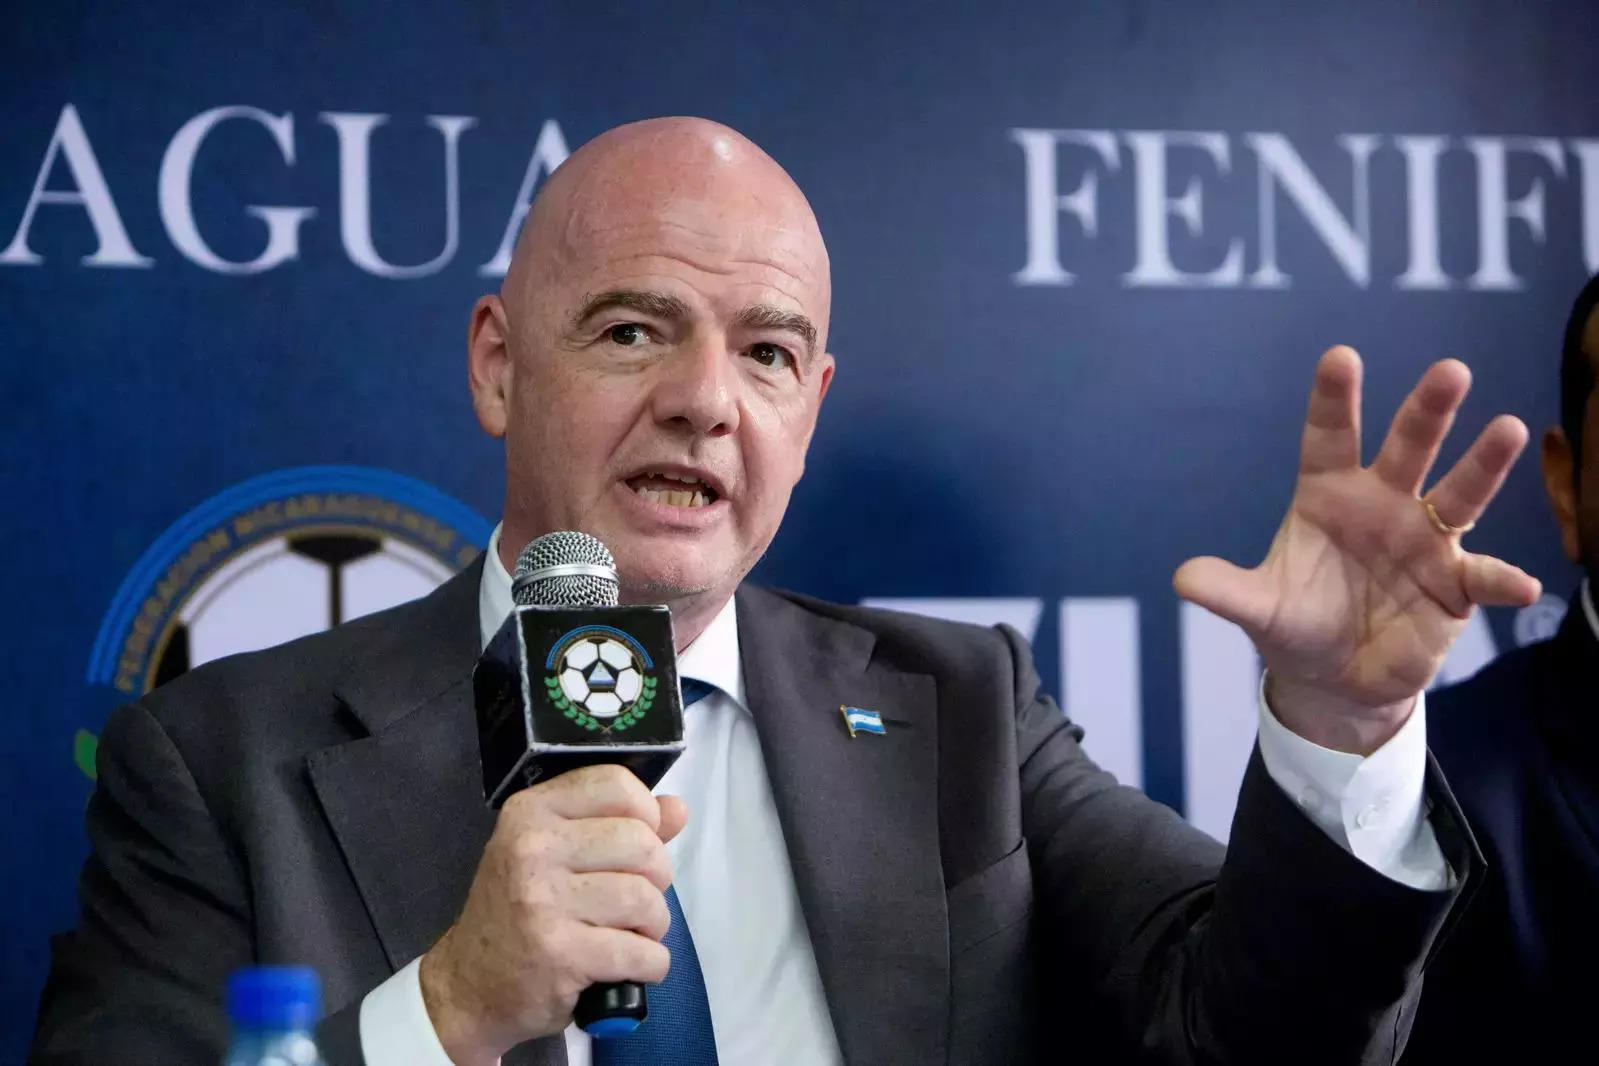 FIFA-Fo-Fum, smell the rot of football's charm